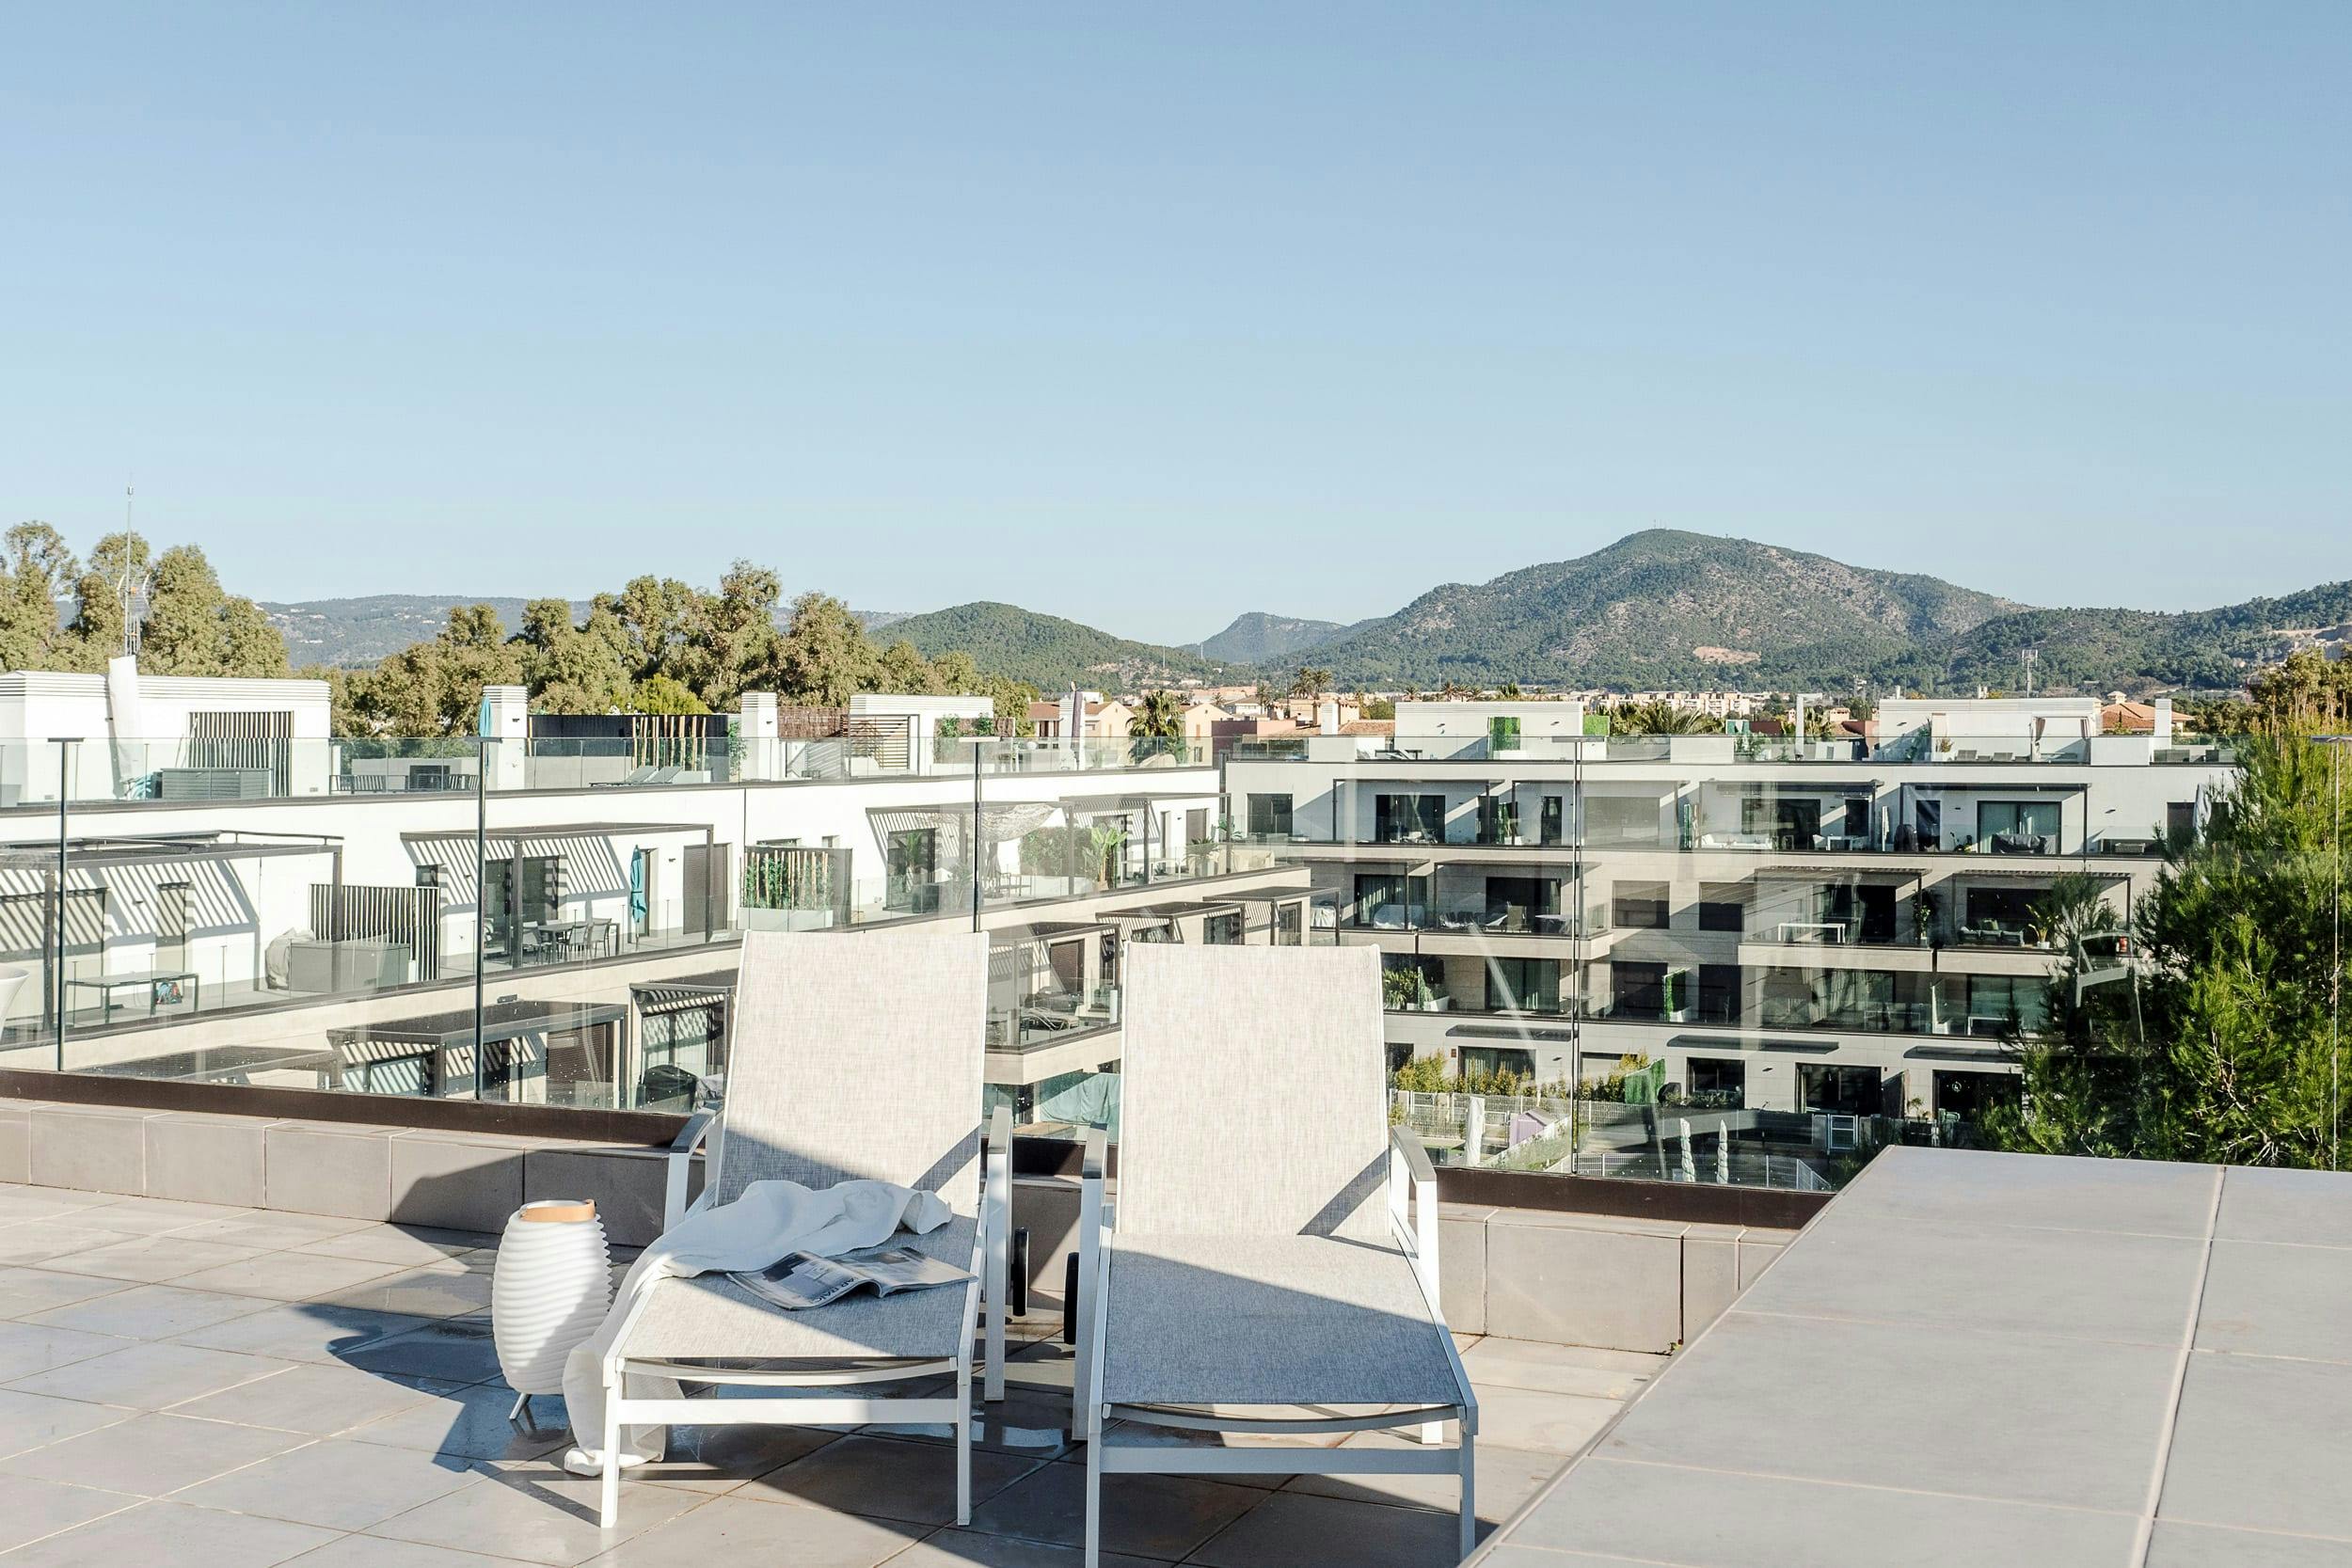 The image features a large, modern apartment building with a balcony on the second floor, overlooking a cityscape with mountains in the background. The balcony is furnished with a white chair, a couch, and a dining table, creating a comfortable outdoor seating area.